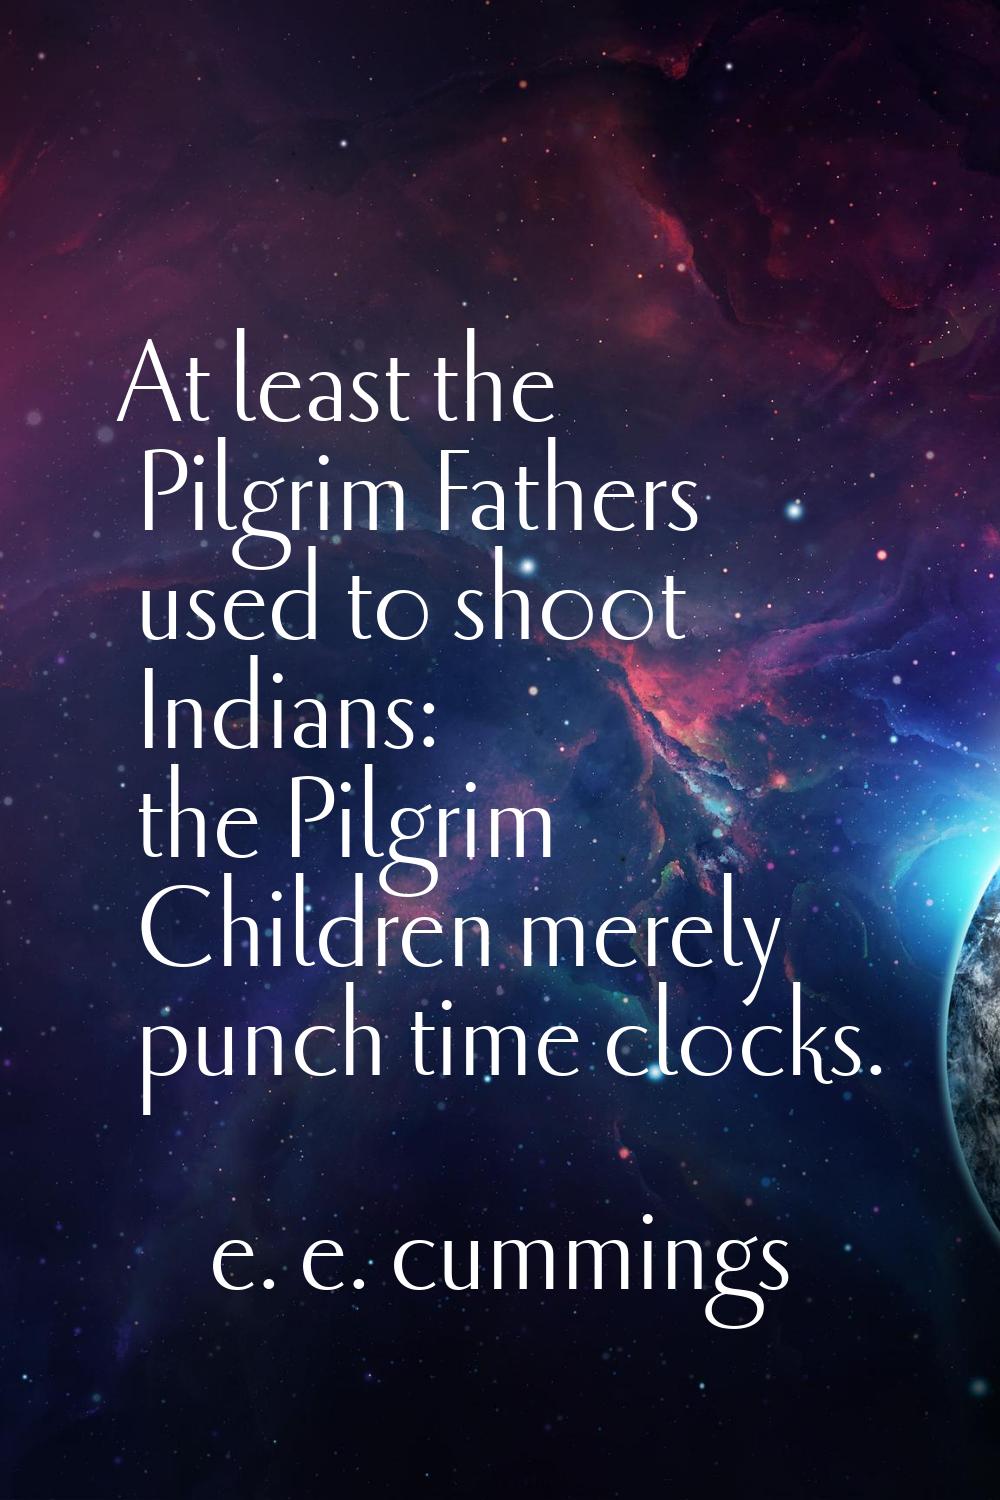 At least the Pilgrim Fathers used to shoot Indians: the Pilgrim Children merely punch time clocks.